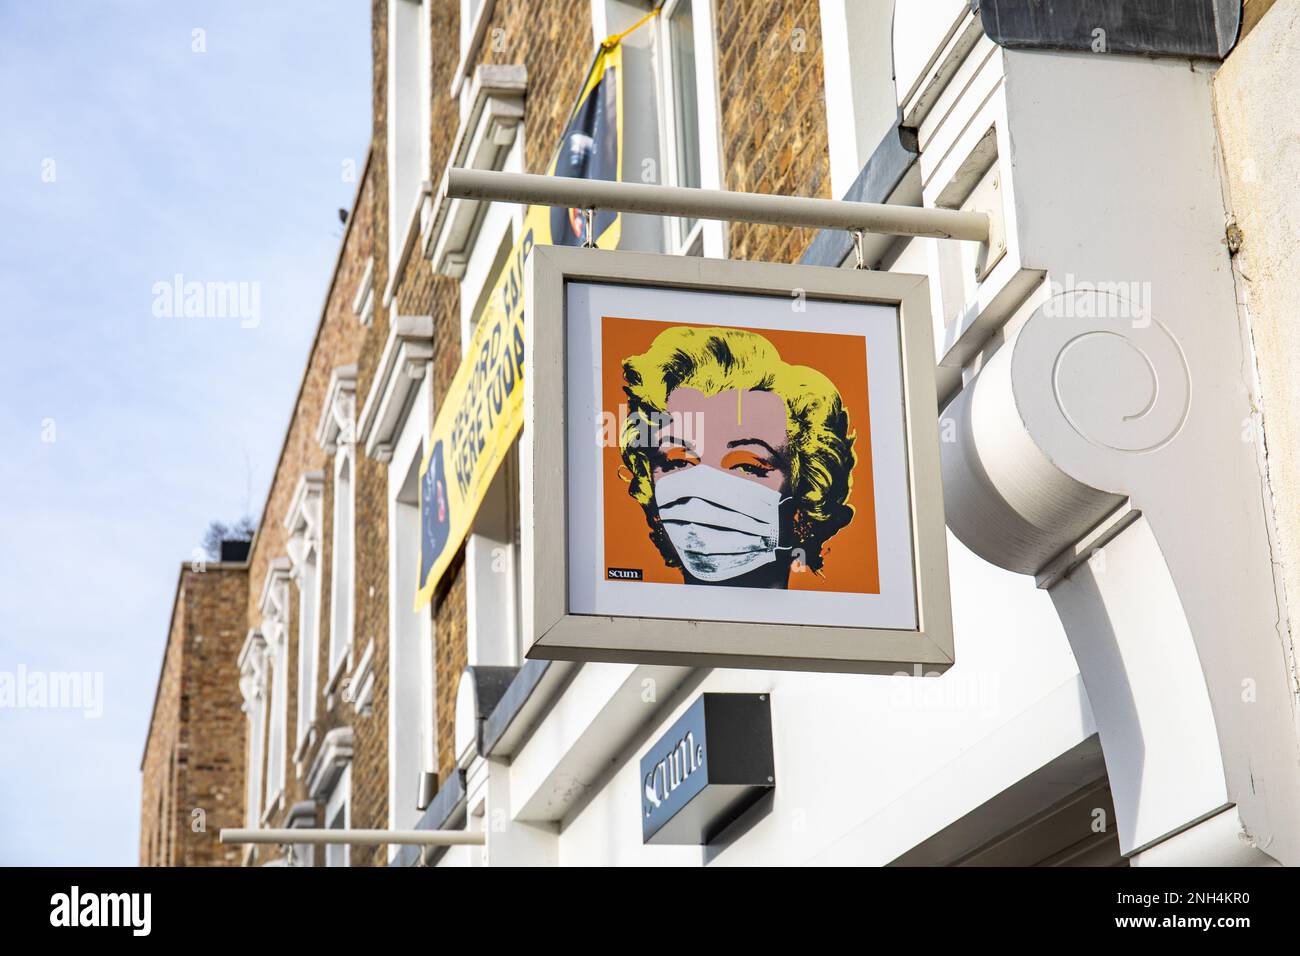 Marilyn Monroe wearing a face mask on Scum UK sign in Camden Town district of London, England Stock Photo